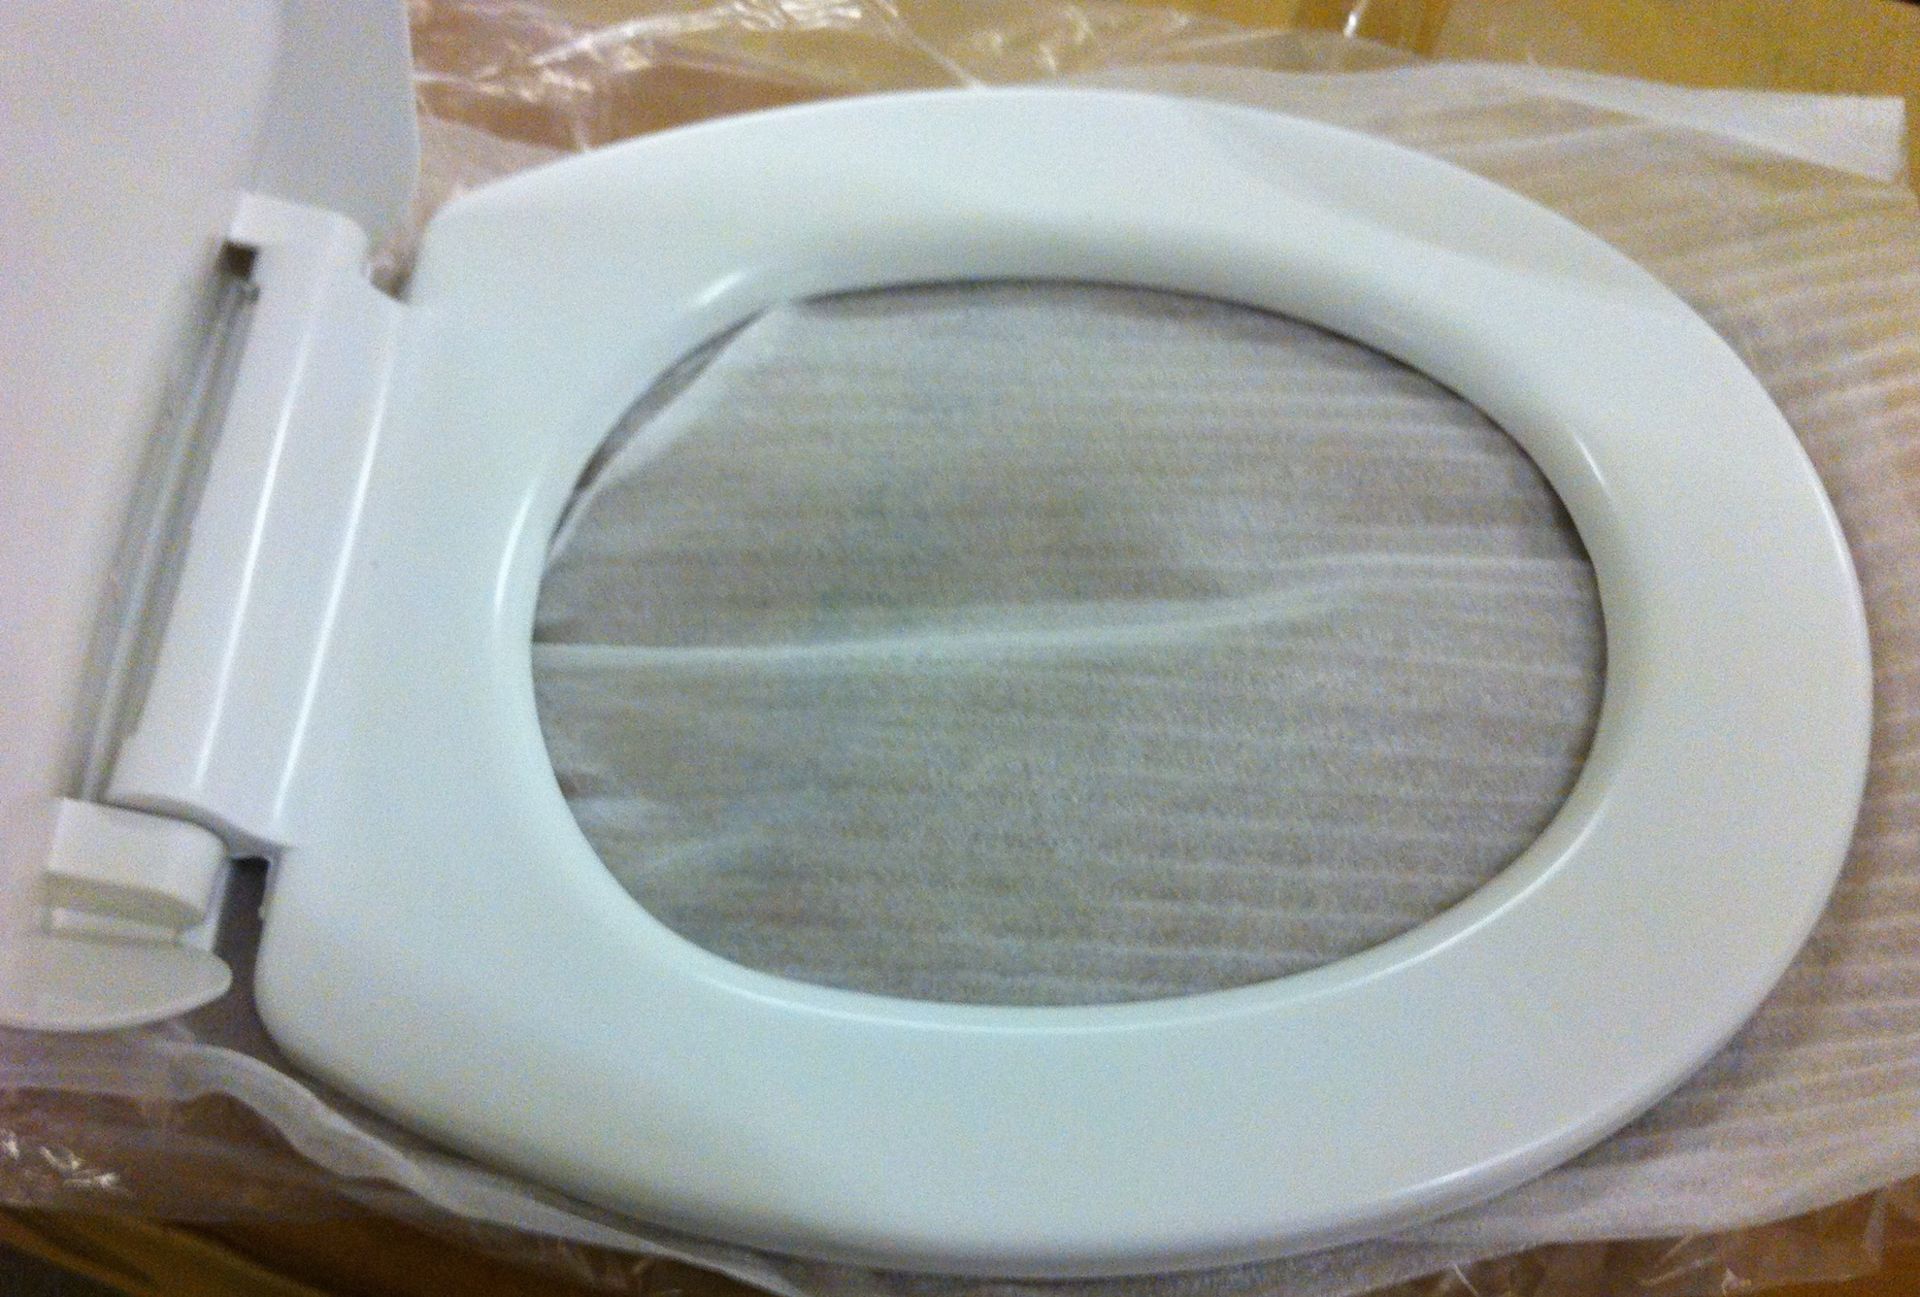 100 x Deluxe Soft Close White Toilet Seats - Brand New Boxed Stock - CL034 - Ideal For Resale - - Image 3 of 6